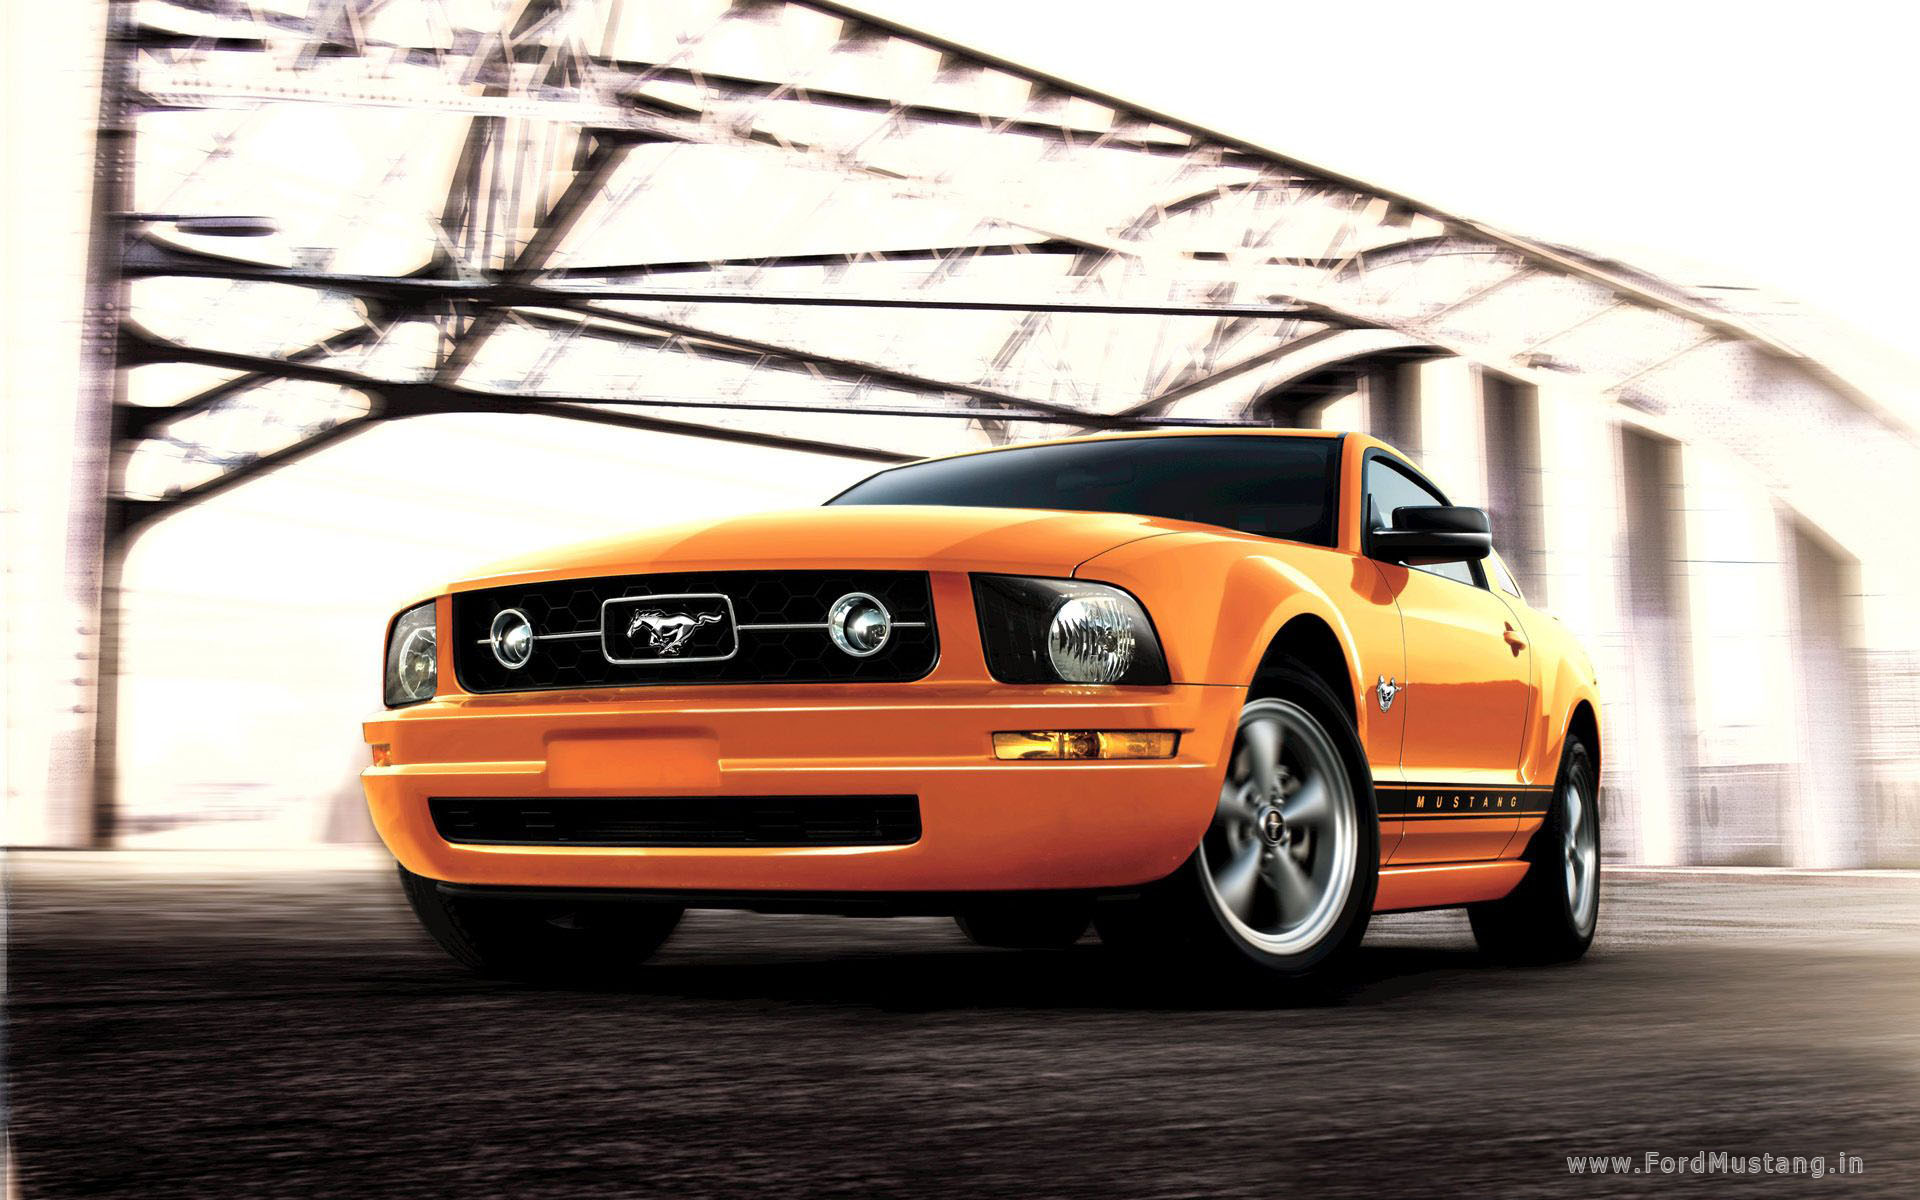 Ford Mustang wallpapers HQ High quality Ford Mustang Ford